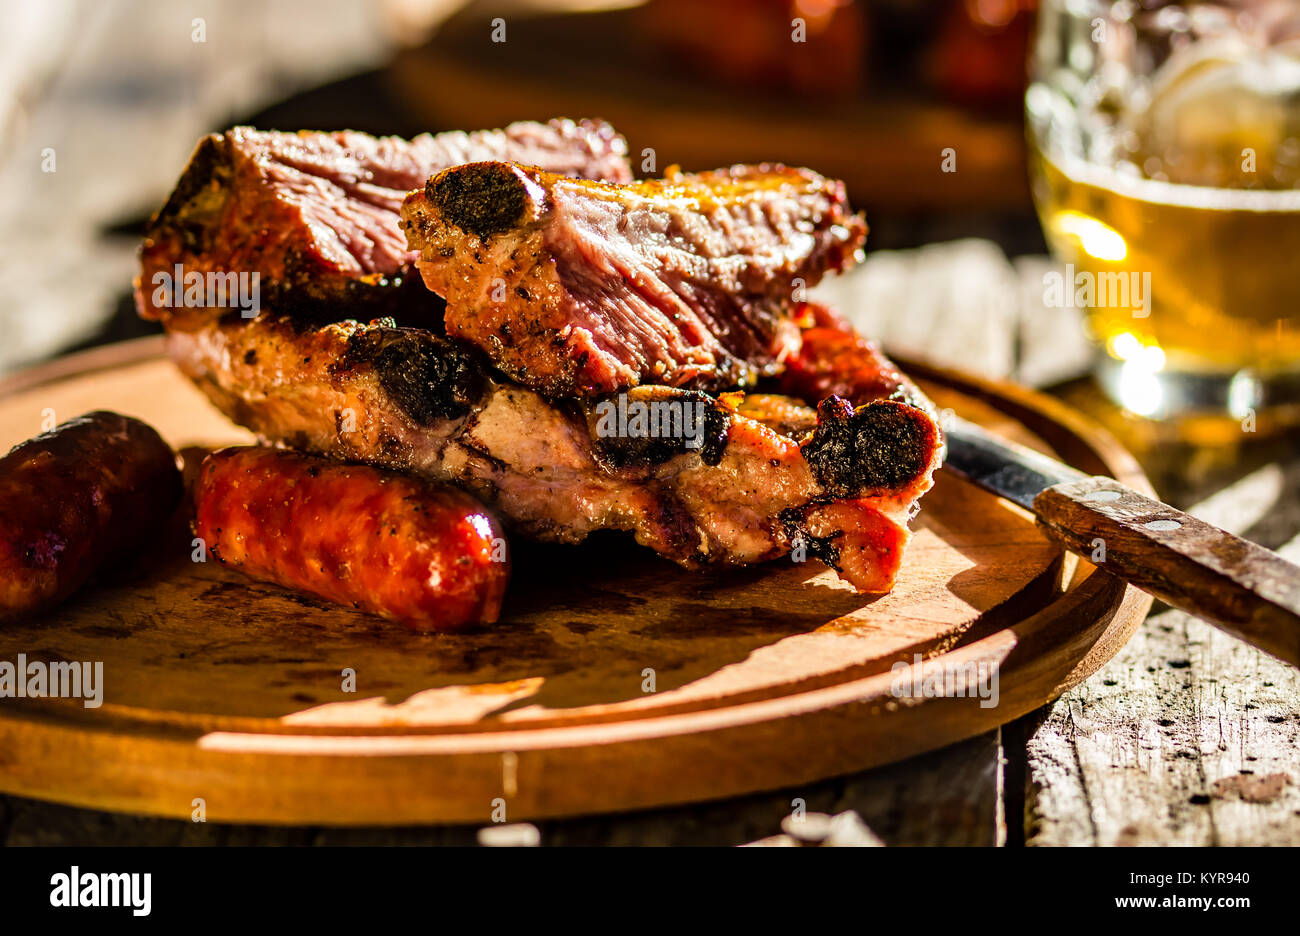 Barbecue pork ribs and sausages with beer on wooden board Stock Photo